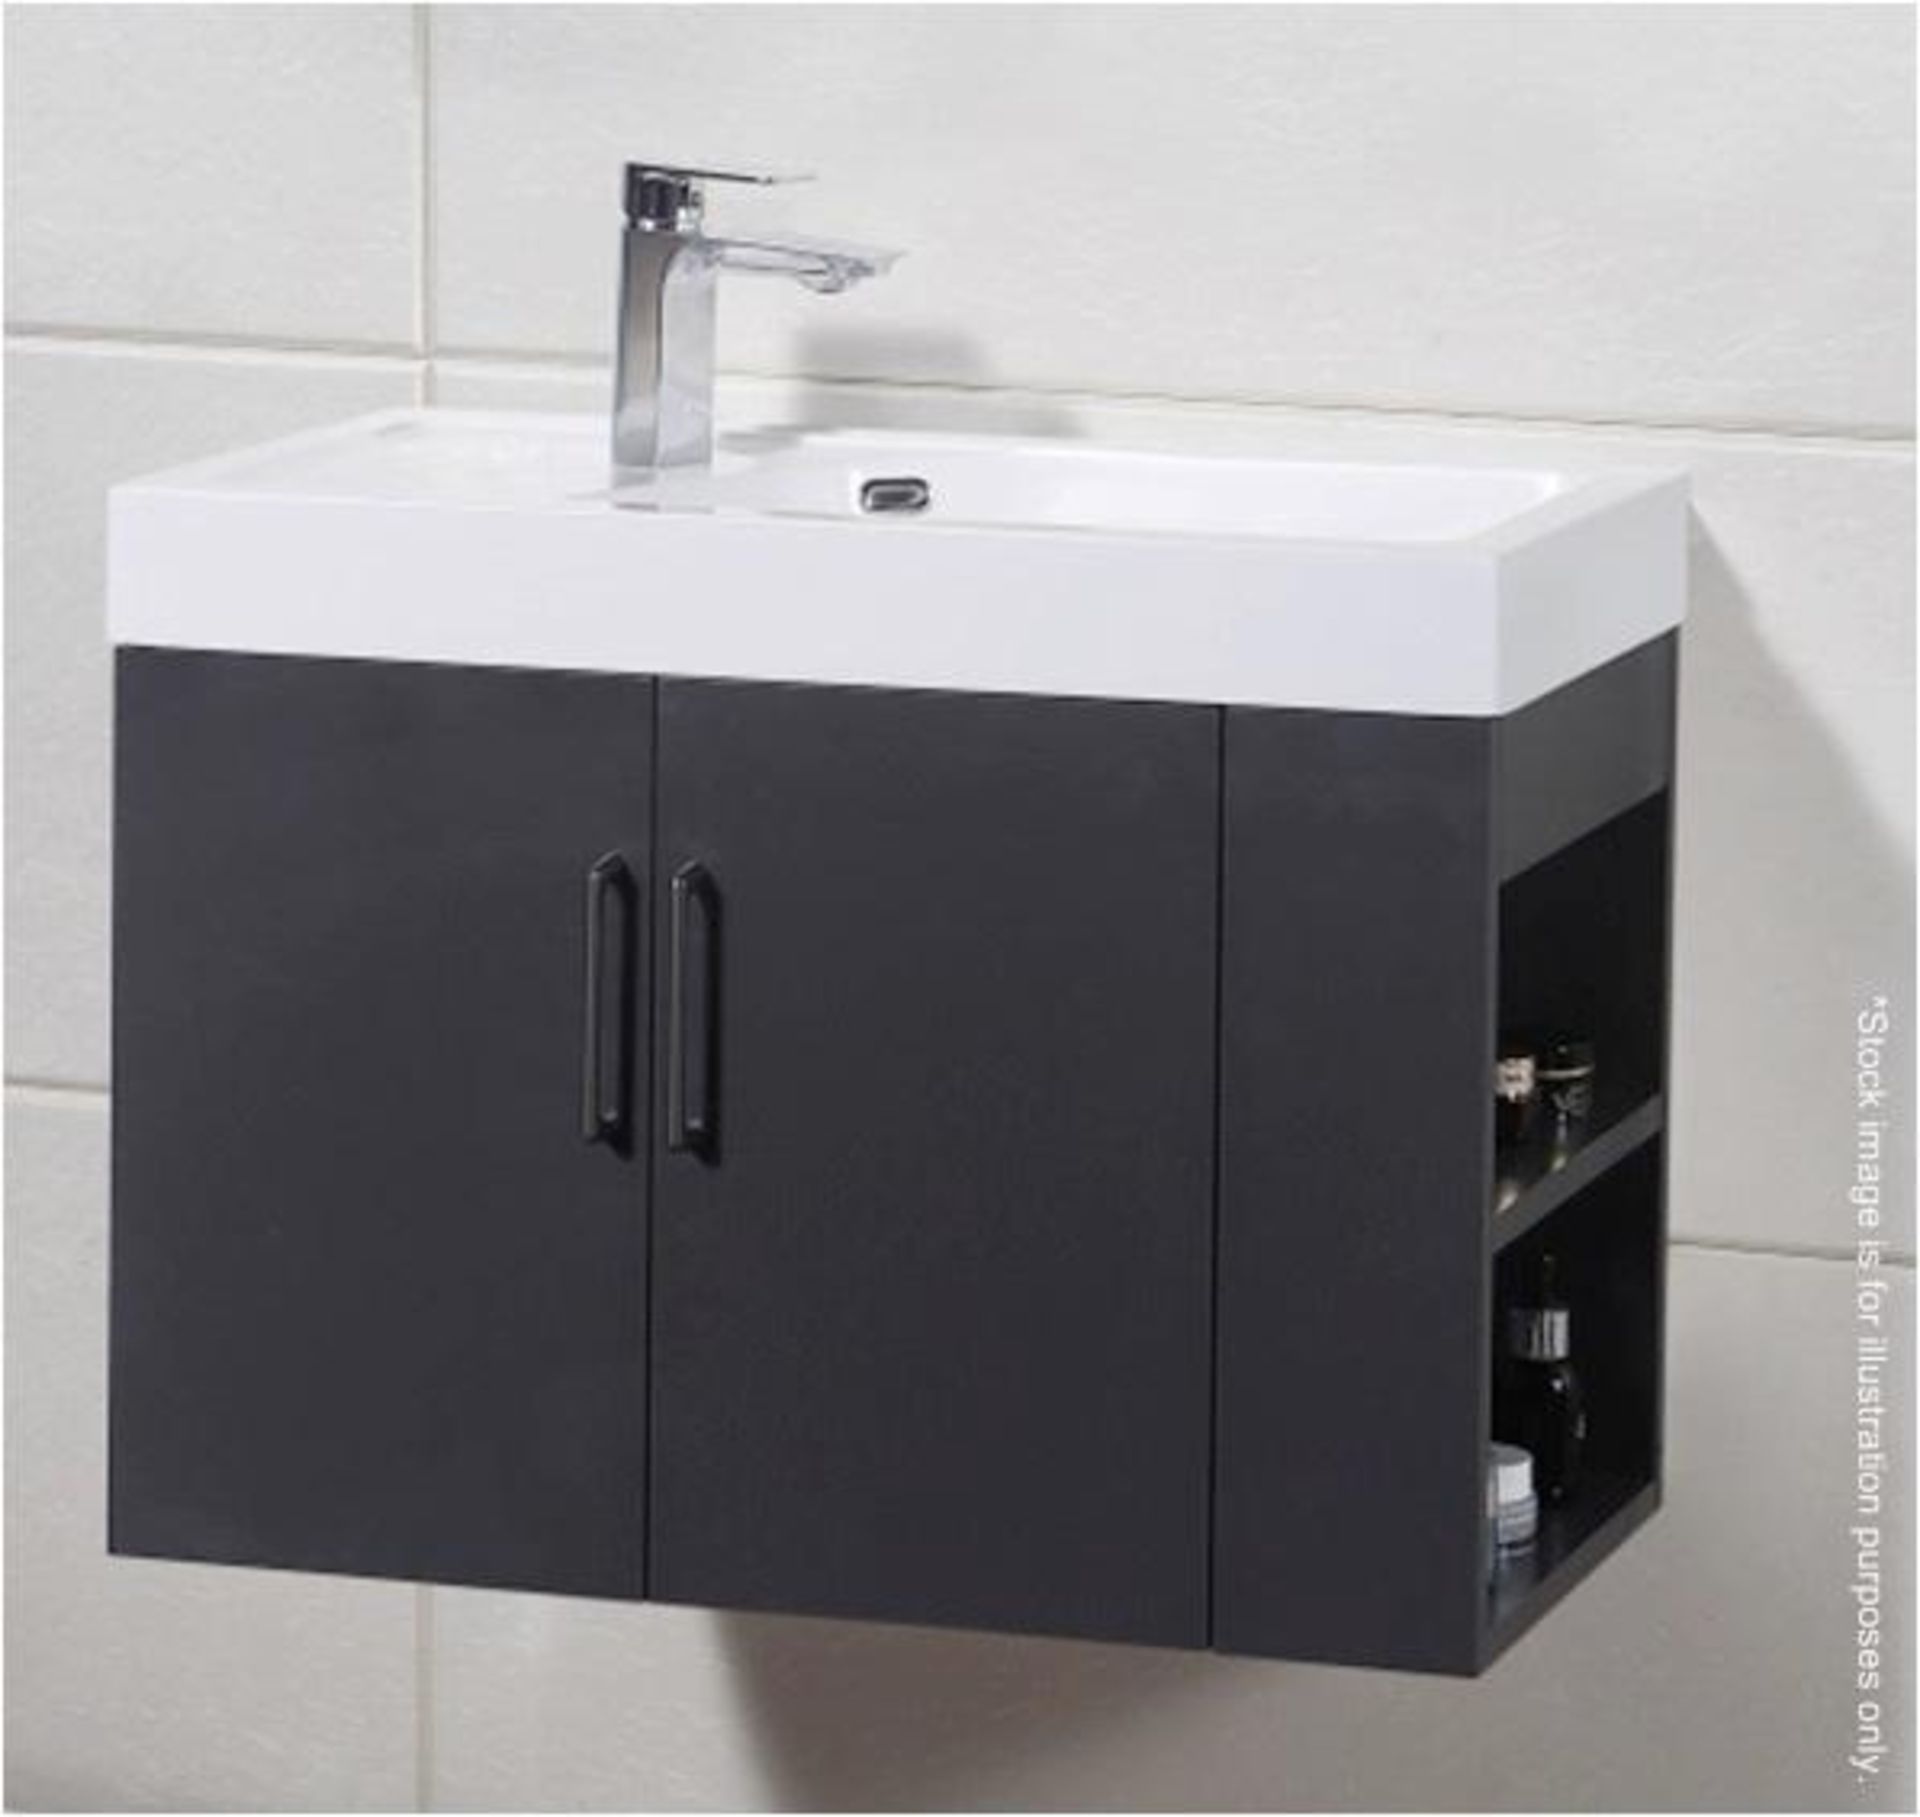 1 x Wall Hung Bathroom Vanity Unit Featuring A Gelcoat Coated Basin And Soft Close Drawers - Finish - Image 2 of 2